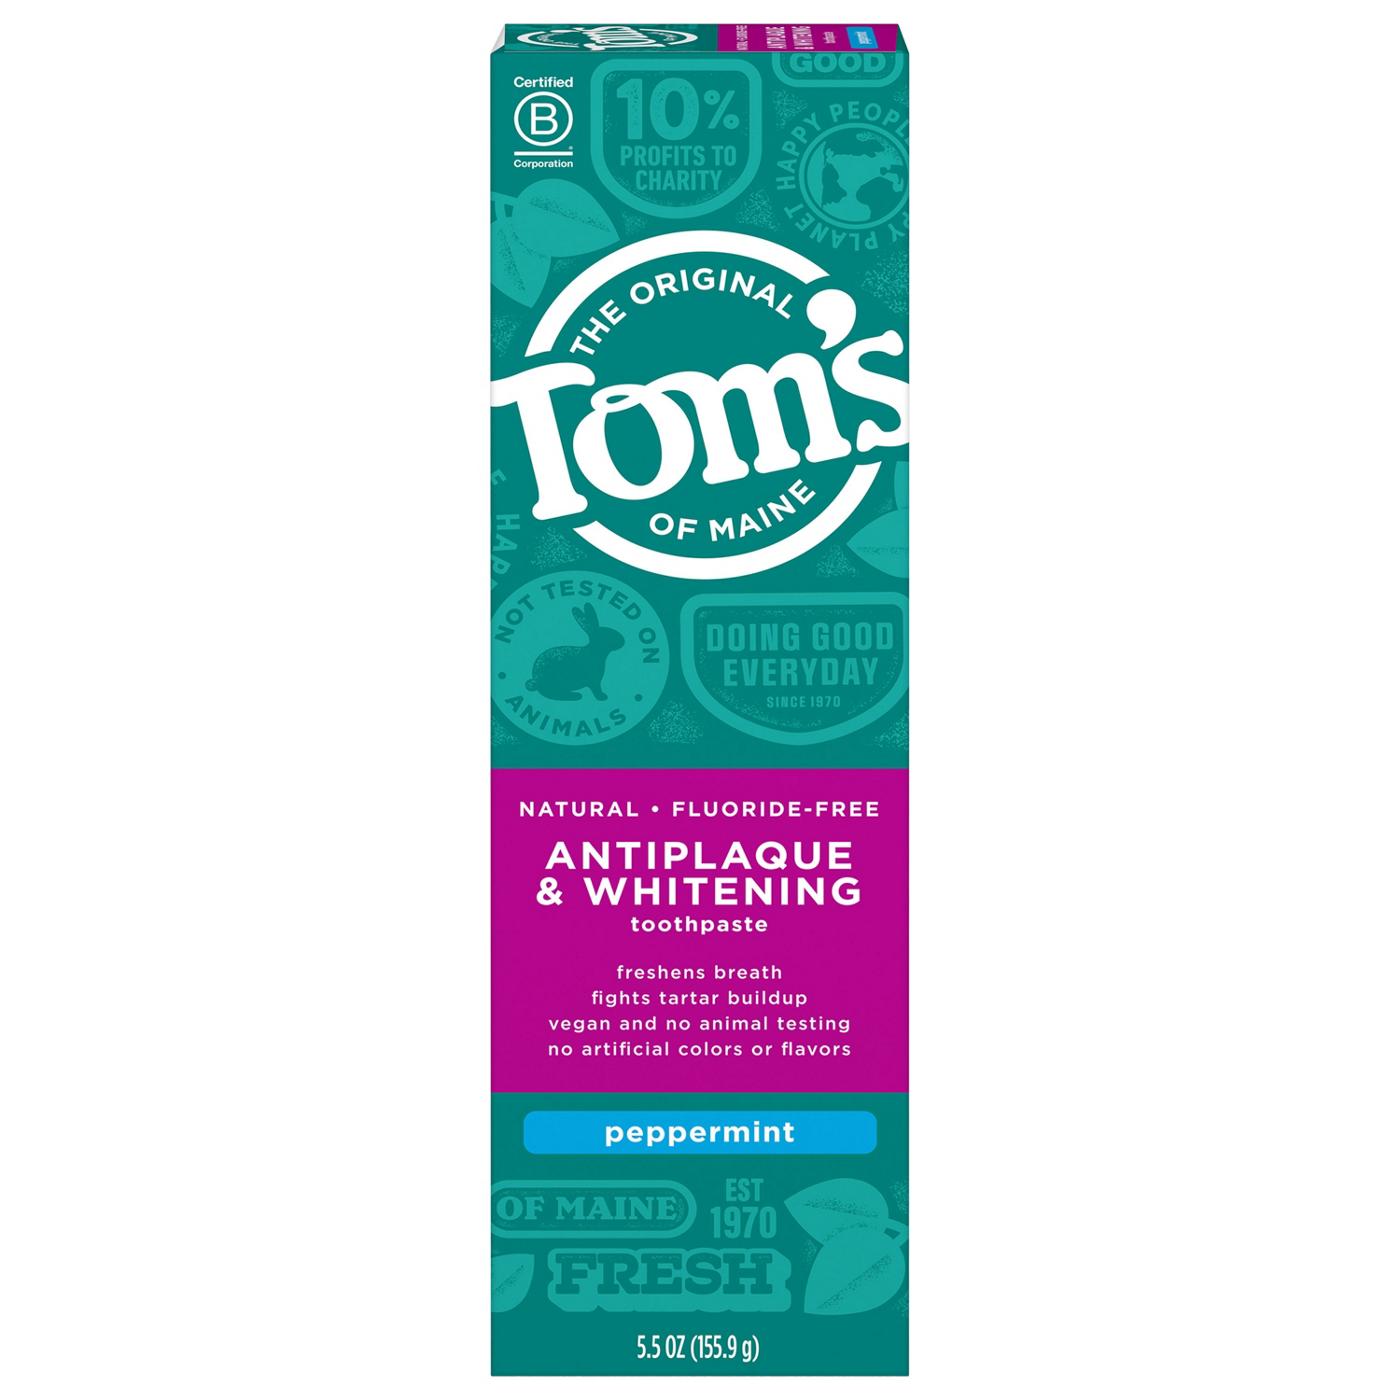 Tom's of Maine Fluoride-Free Antiplaque & Whitening Toothpaste - Peppermint; image 1 of 5